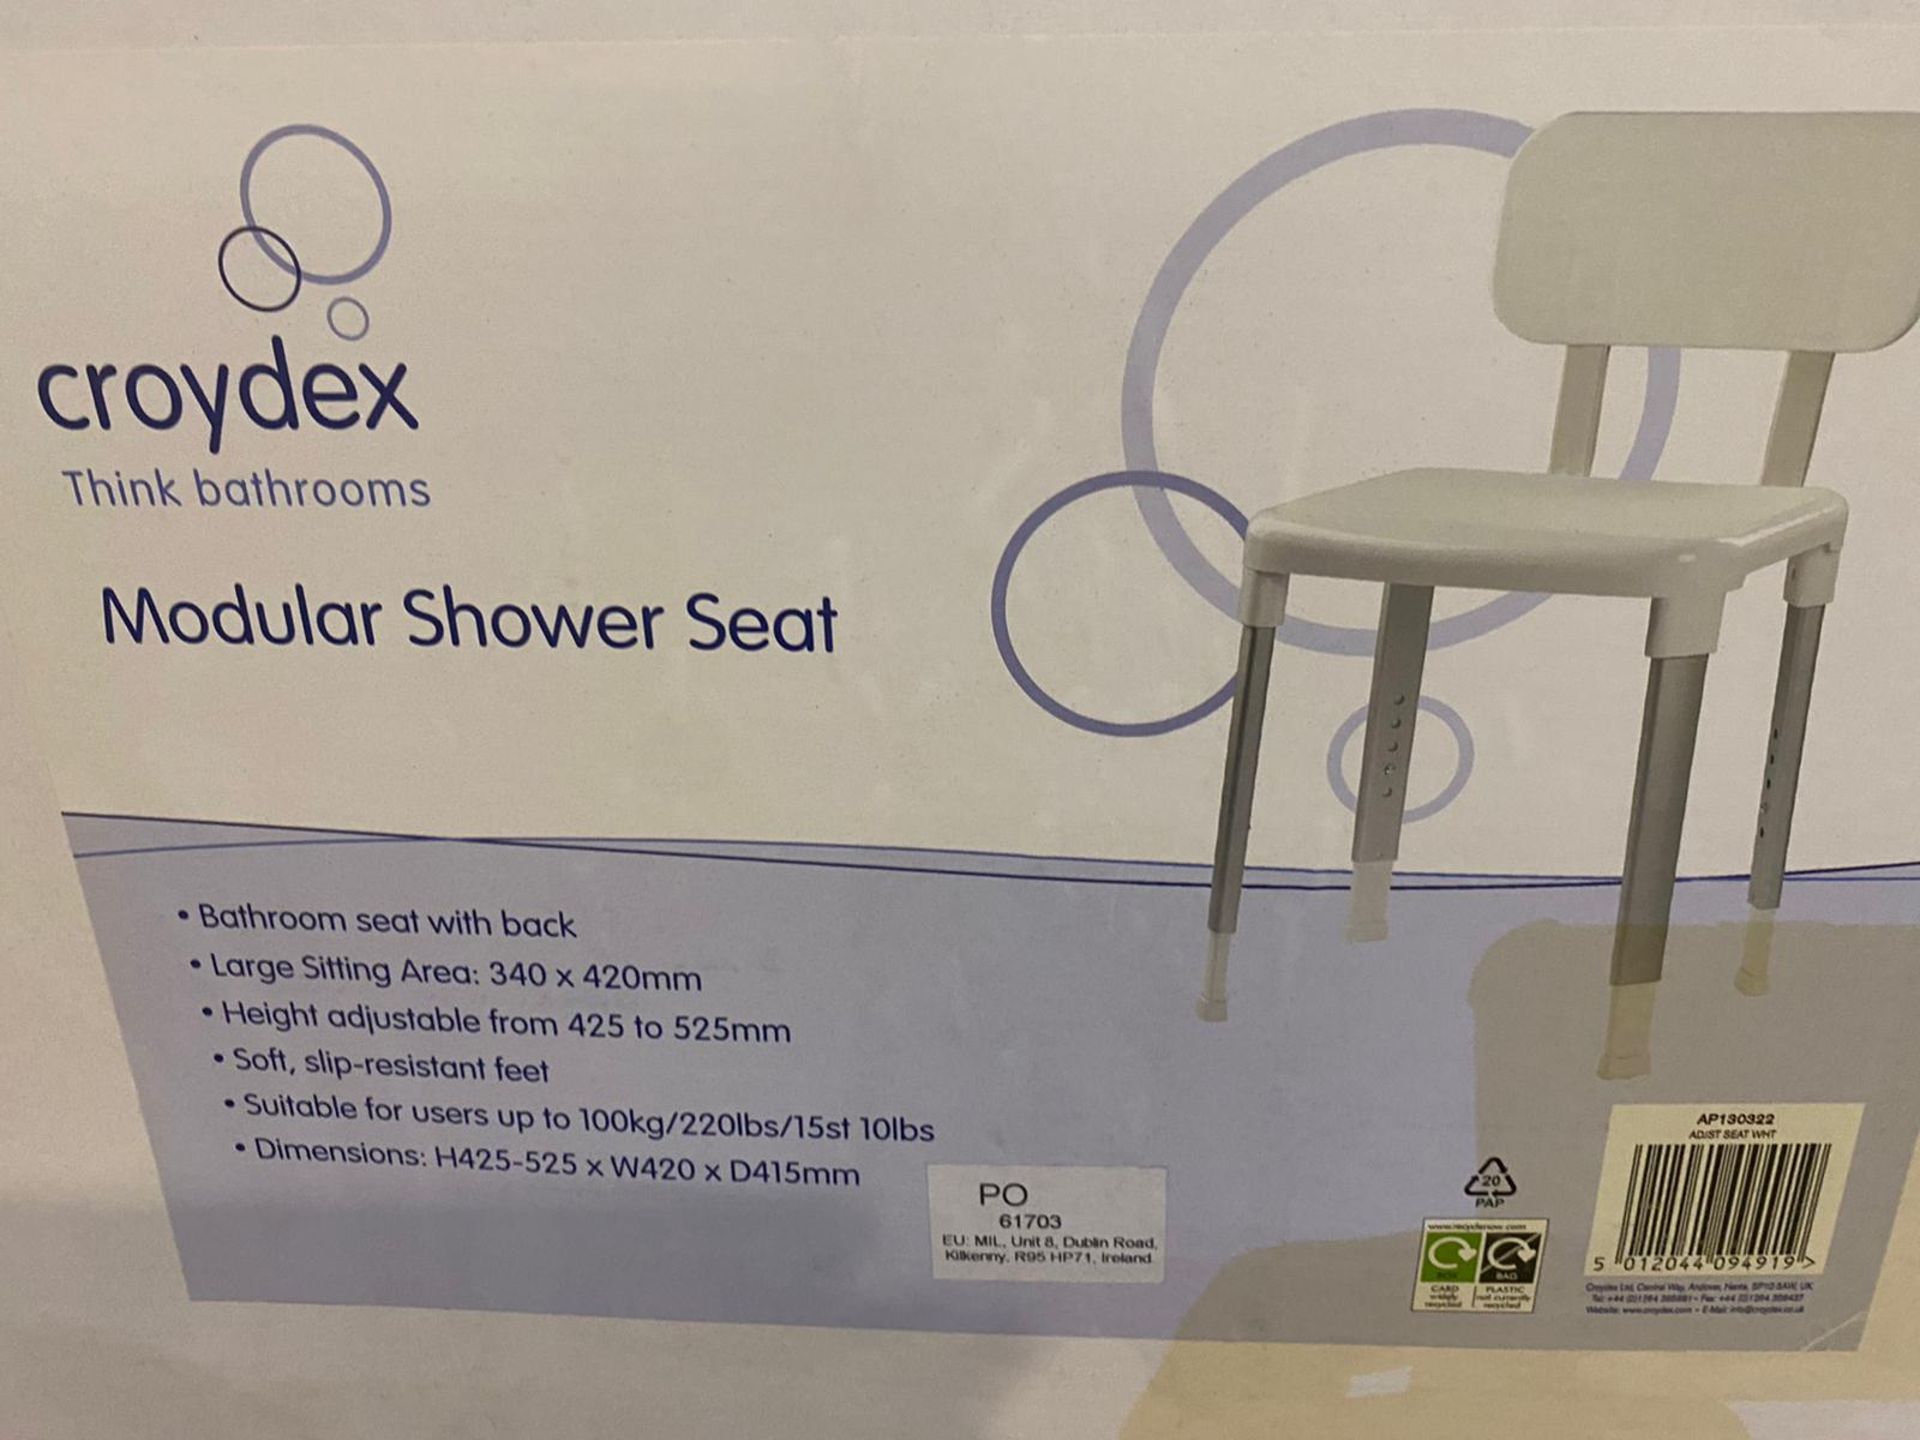 10 x Croydex Modular Shower Seats - New Boxed Stock - RRP £660 - CL740 - Ref: SRS028 - Location: - Image 3 of 3